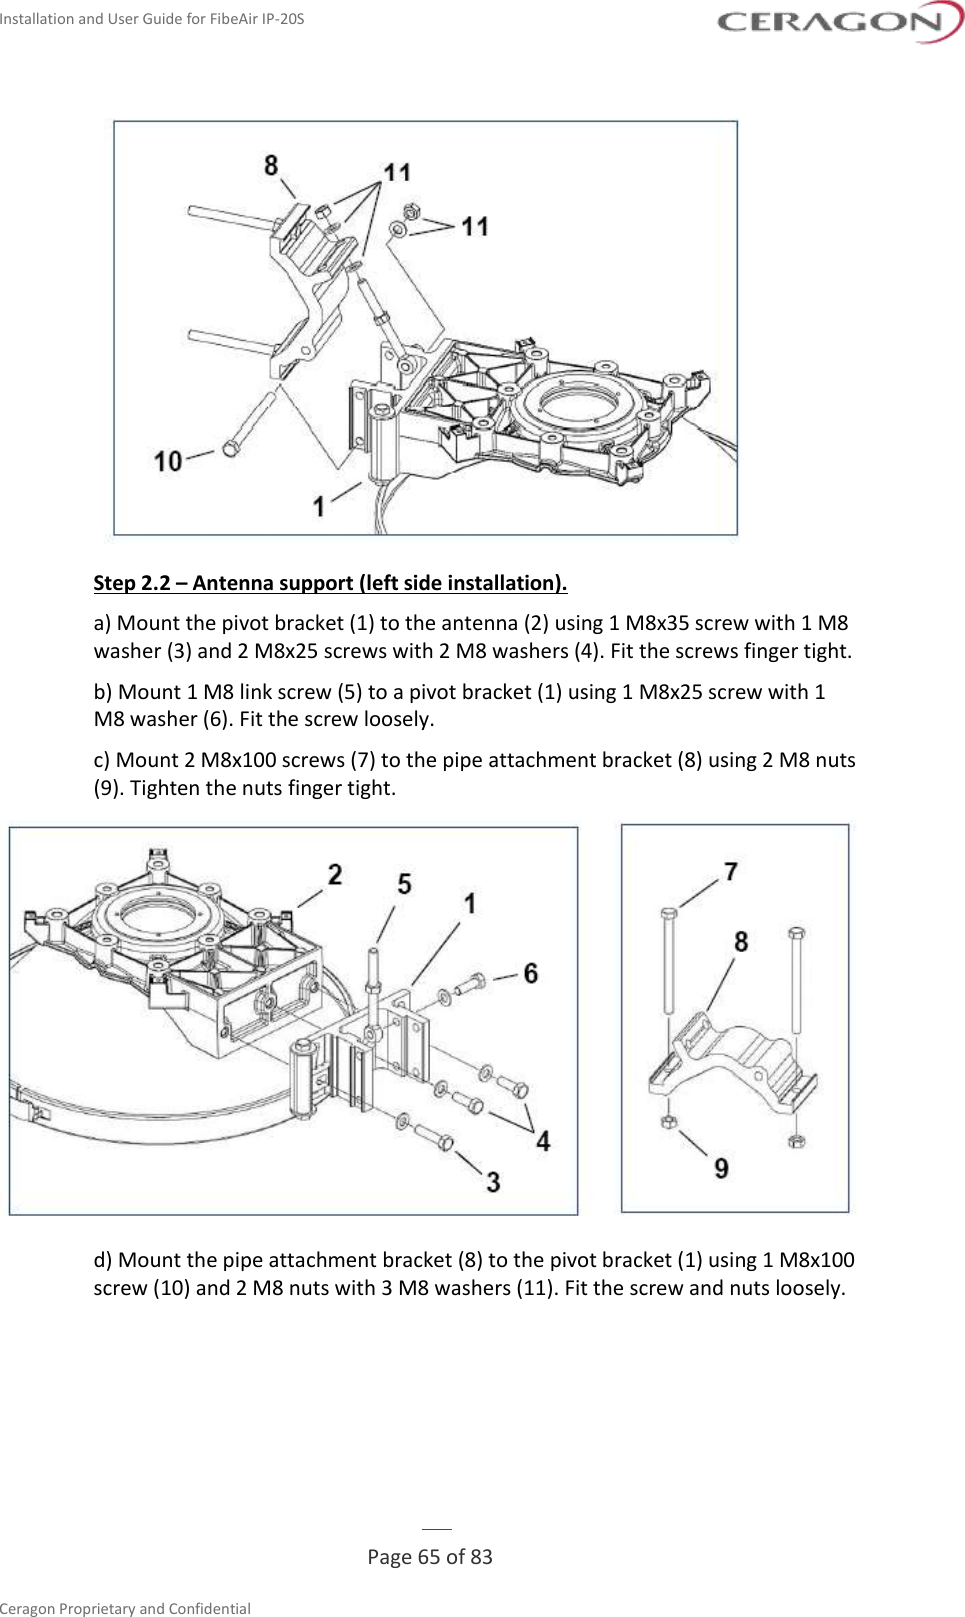 Installation and User Guide for FibeAir IP-20S   Page 65 of 83  Ceragon Proprietary and Confidential      Step 2.2 – Antenna support (left side installation). a) Mount the pivot bracket (1) to the antenna (2) using 1 M8x35 screw with 1 M8 washer (3) and 2 M8x25 screws with 2 M8 washers (4). Fit the screws finger tight. b) Mount 1 M8 link screw (5) to a pivot bracket (1) using 1 M8x25 screw with 1 M8 washer (6). Fit the screw loosely. c) Mount 2 M8x100 screws (7) to the pipe attachment bracket (8) using 2 M8 nuts (9). Tighten the nuts finger tight.  d) Mount the pipe attachment bracket (8) to the pivot bracket (1) using 1 M8x100 screw (10) and 2 M8 nuts with 3 M8 washers (11). Fit the screw and nuts loosely. 